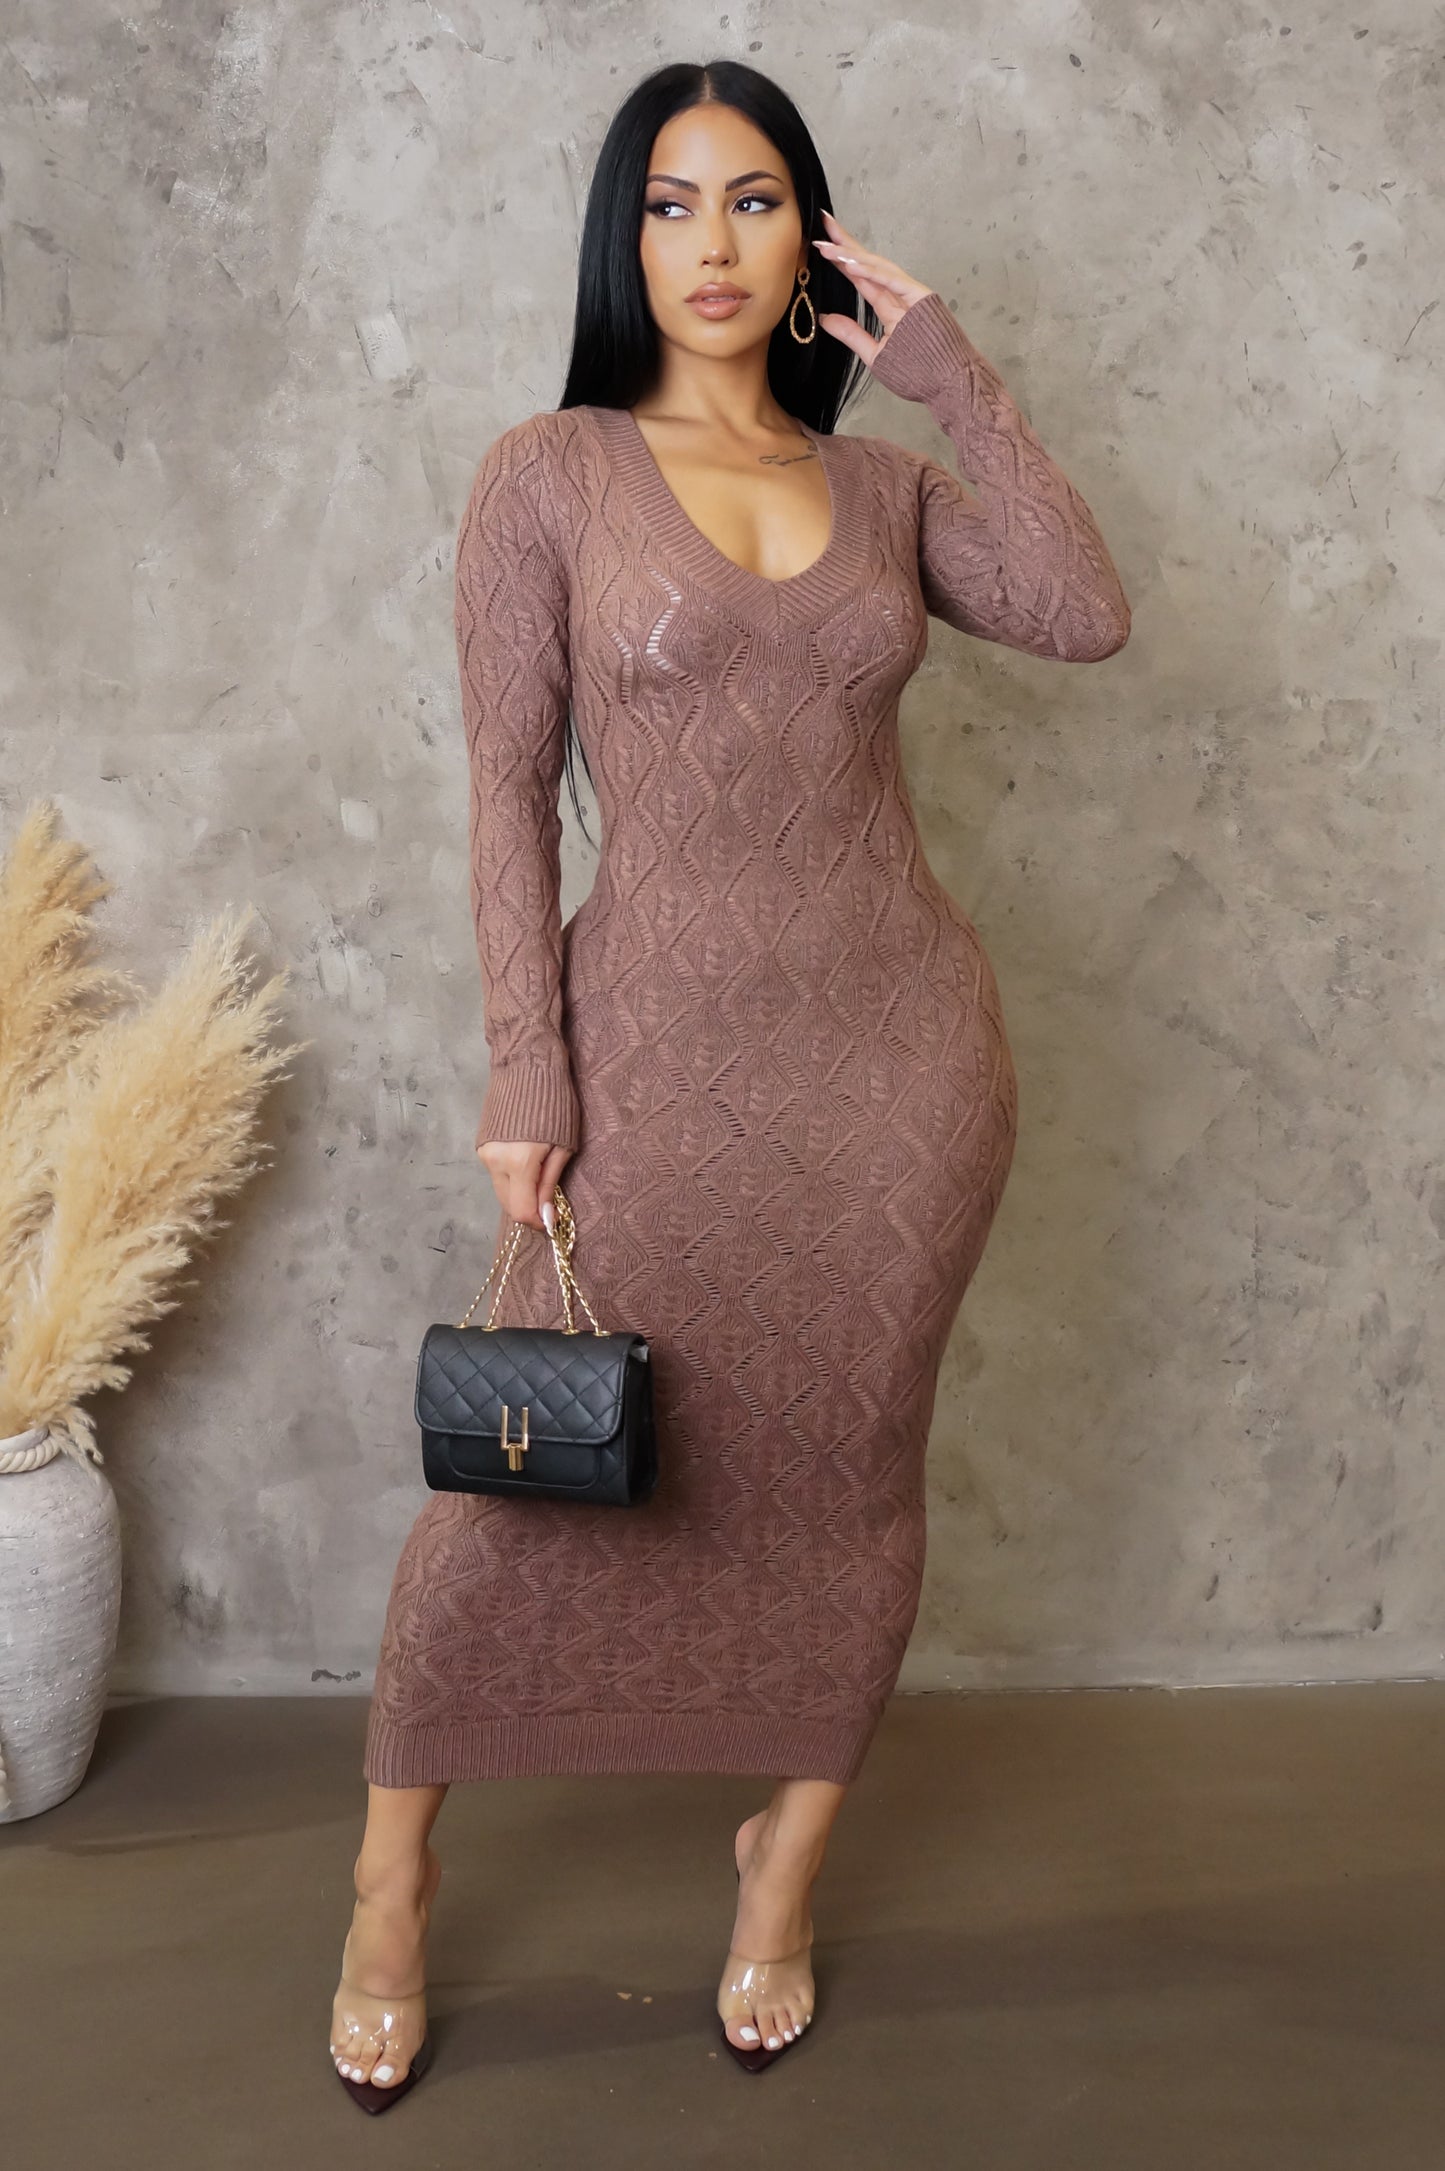 All About You Midi Dress - Brown